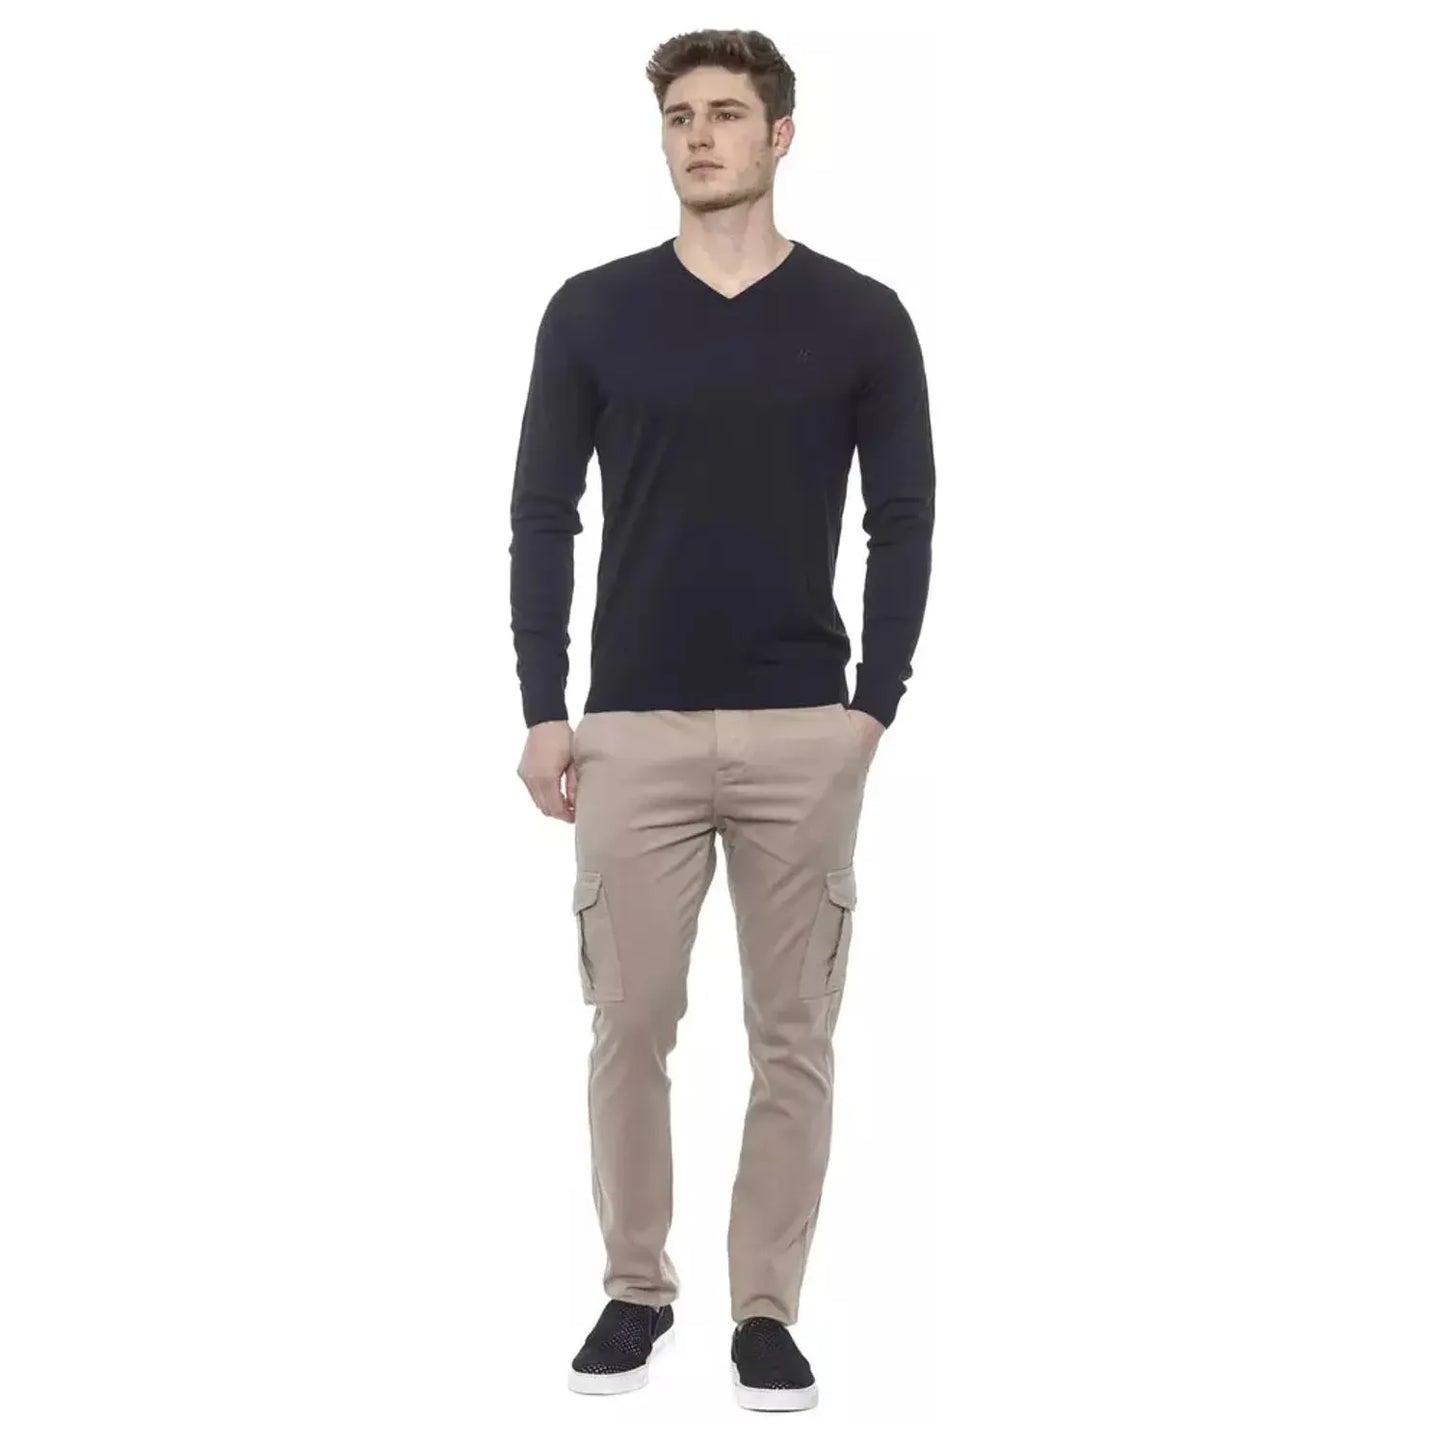 Conte of Florence Elegant V-Neck Cotton Sweater for Men prussianblue-sweater-1 stock_product_image_20335_957976052-14-31580845-b22.webp